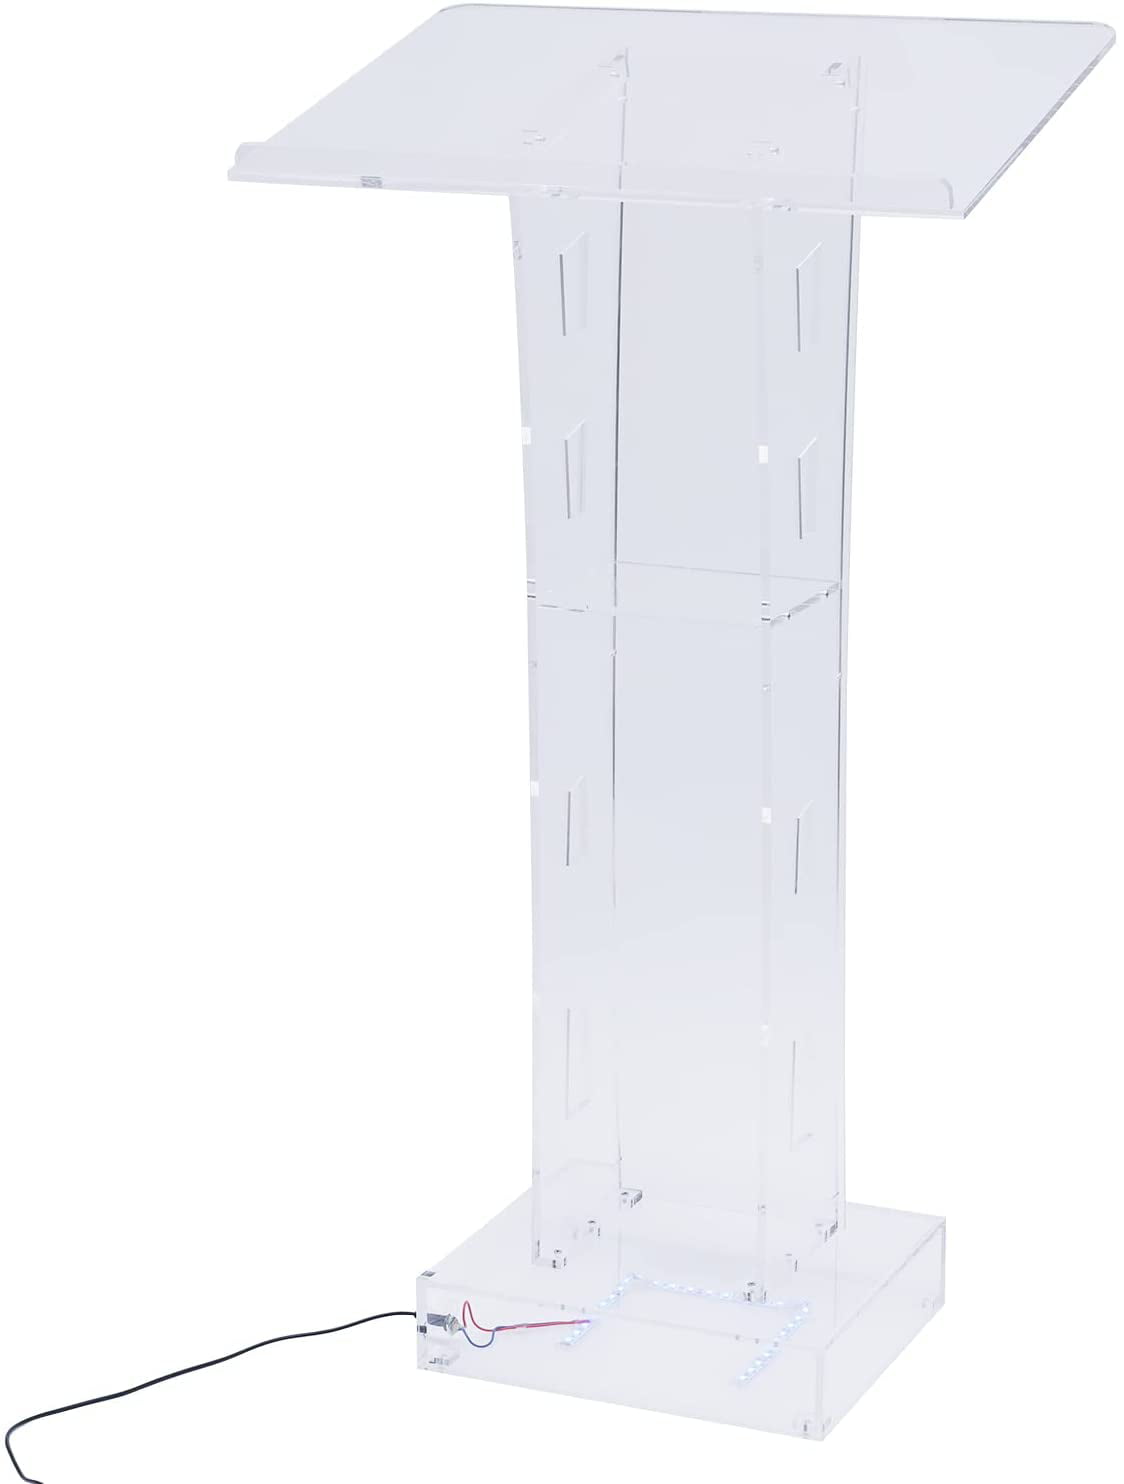 Acrylic Pulpits for Churches Safety Corners & Storage Board Durable for School Church Embassy Lectern Office Conference Pulpit Meeting Room Display Clear Podium Stand 